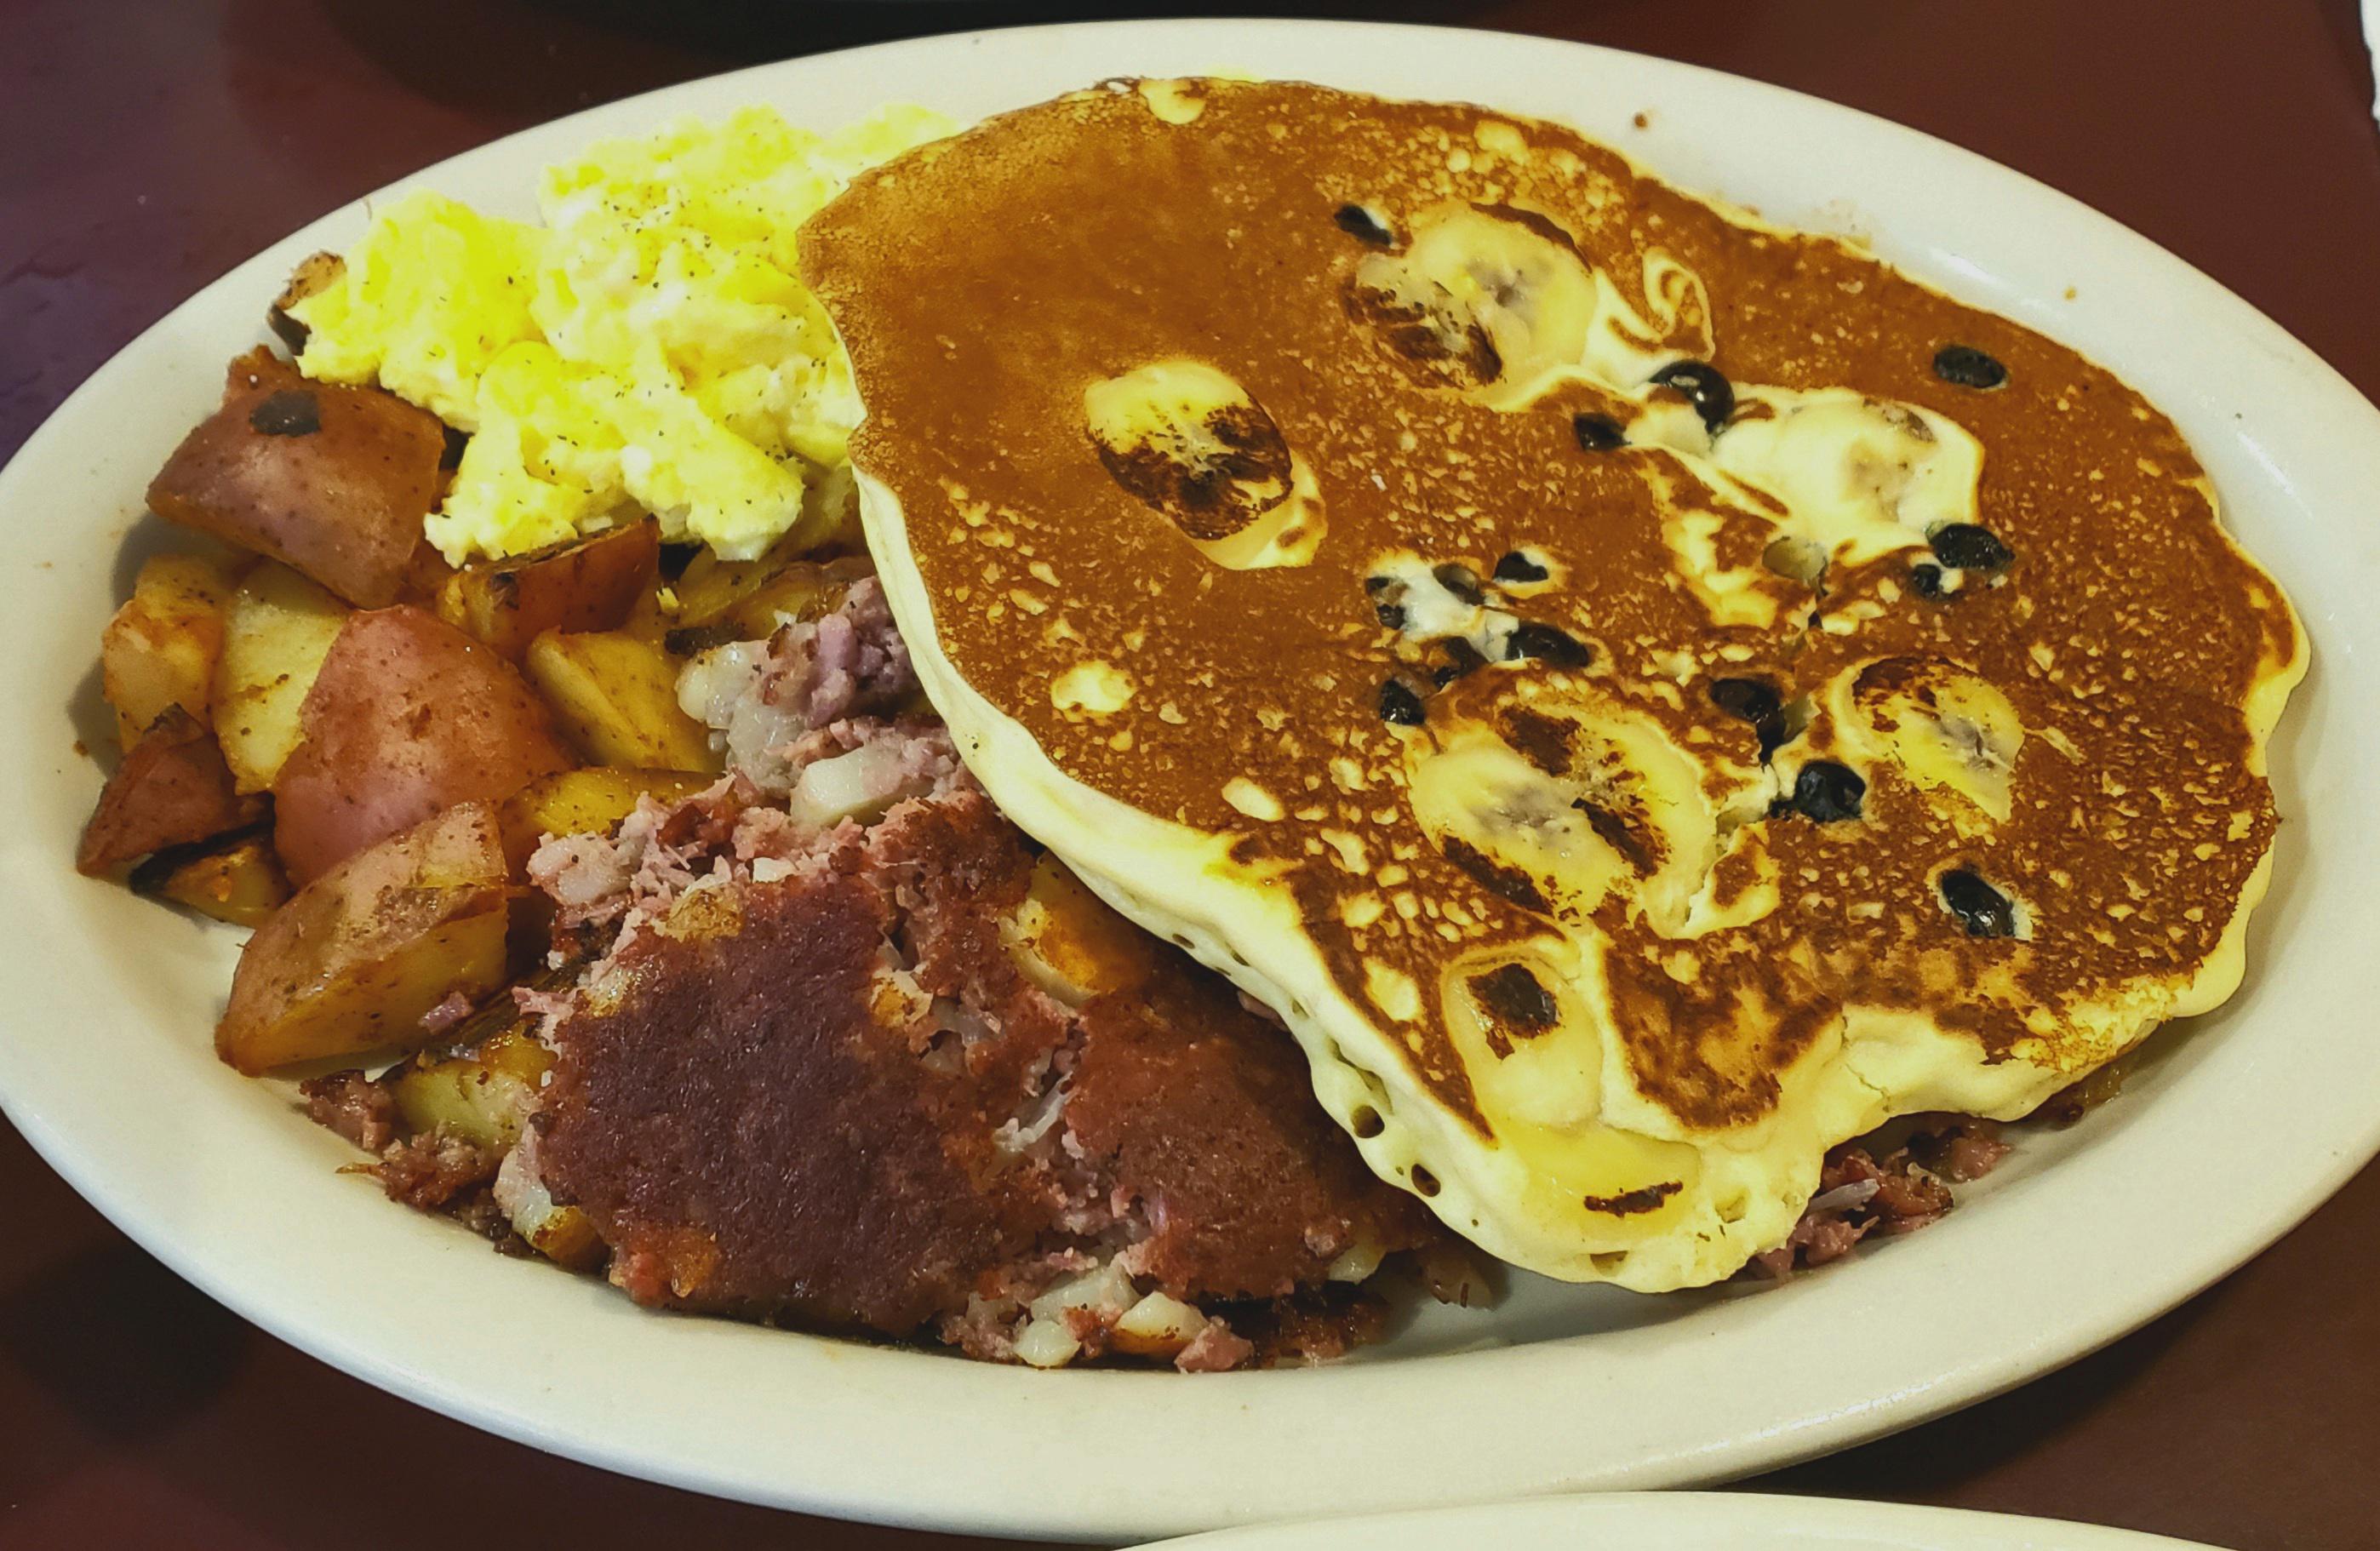 I Ate Bailey S Big Breakfast Blueberry Banana Pancakes Rosemary Potatoes Corned Beef Hash And Scrambled Eggs With Crumbled Feta Goldman S Deli Key West Fl Dining And Cooking